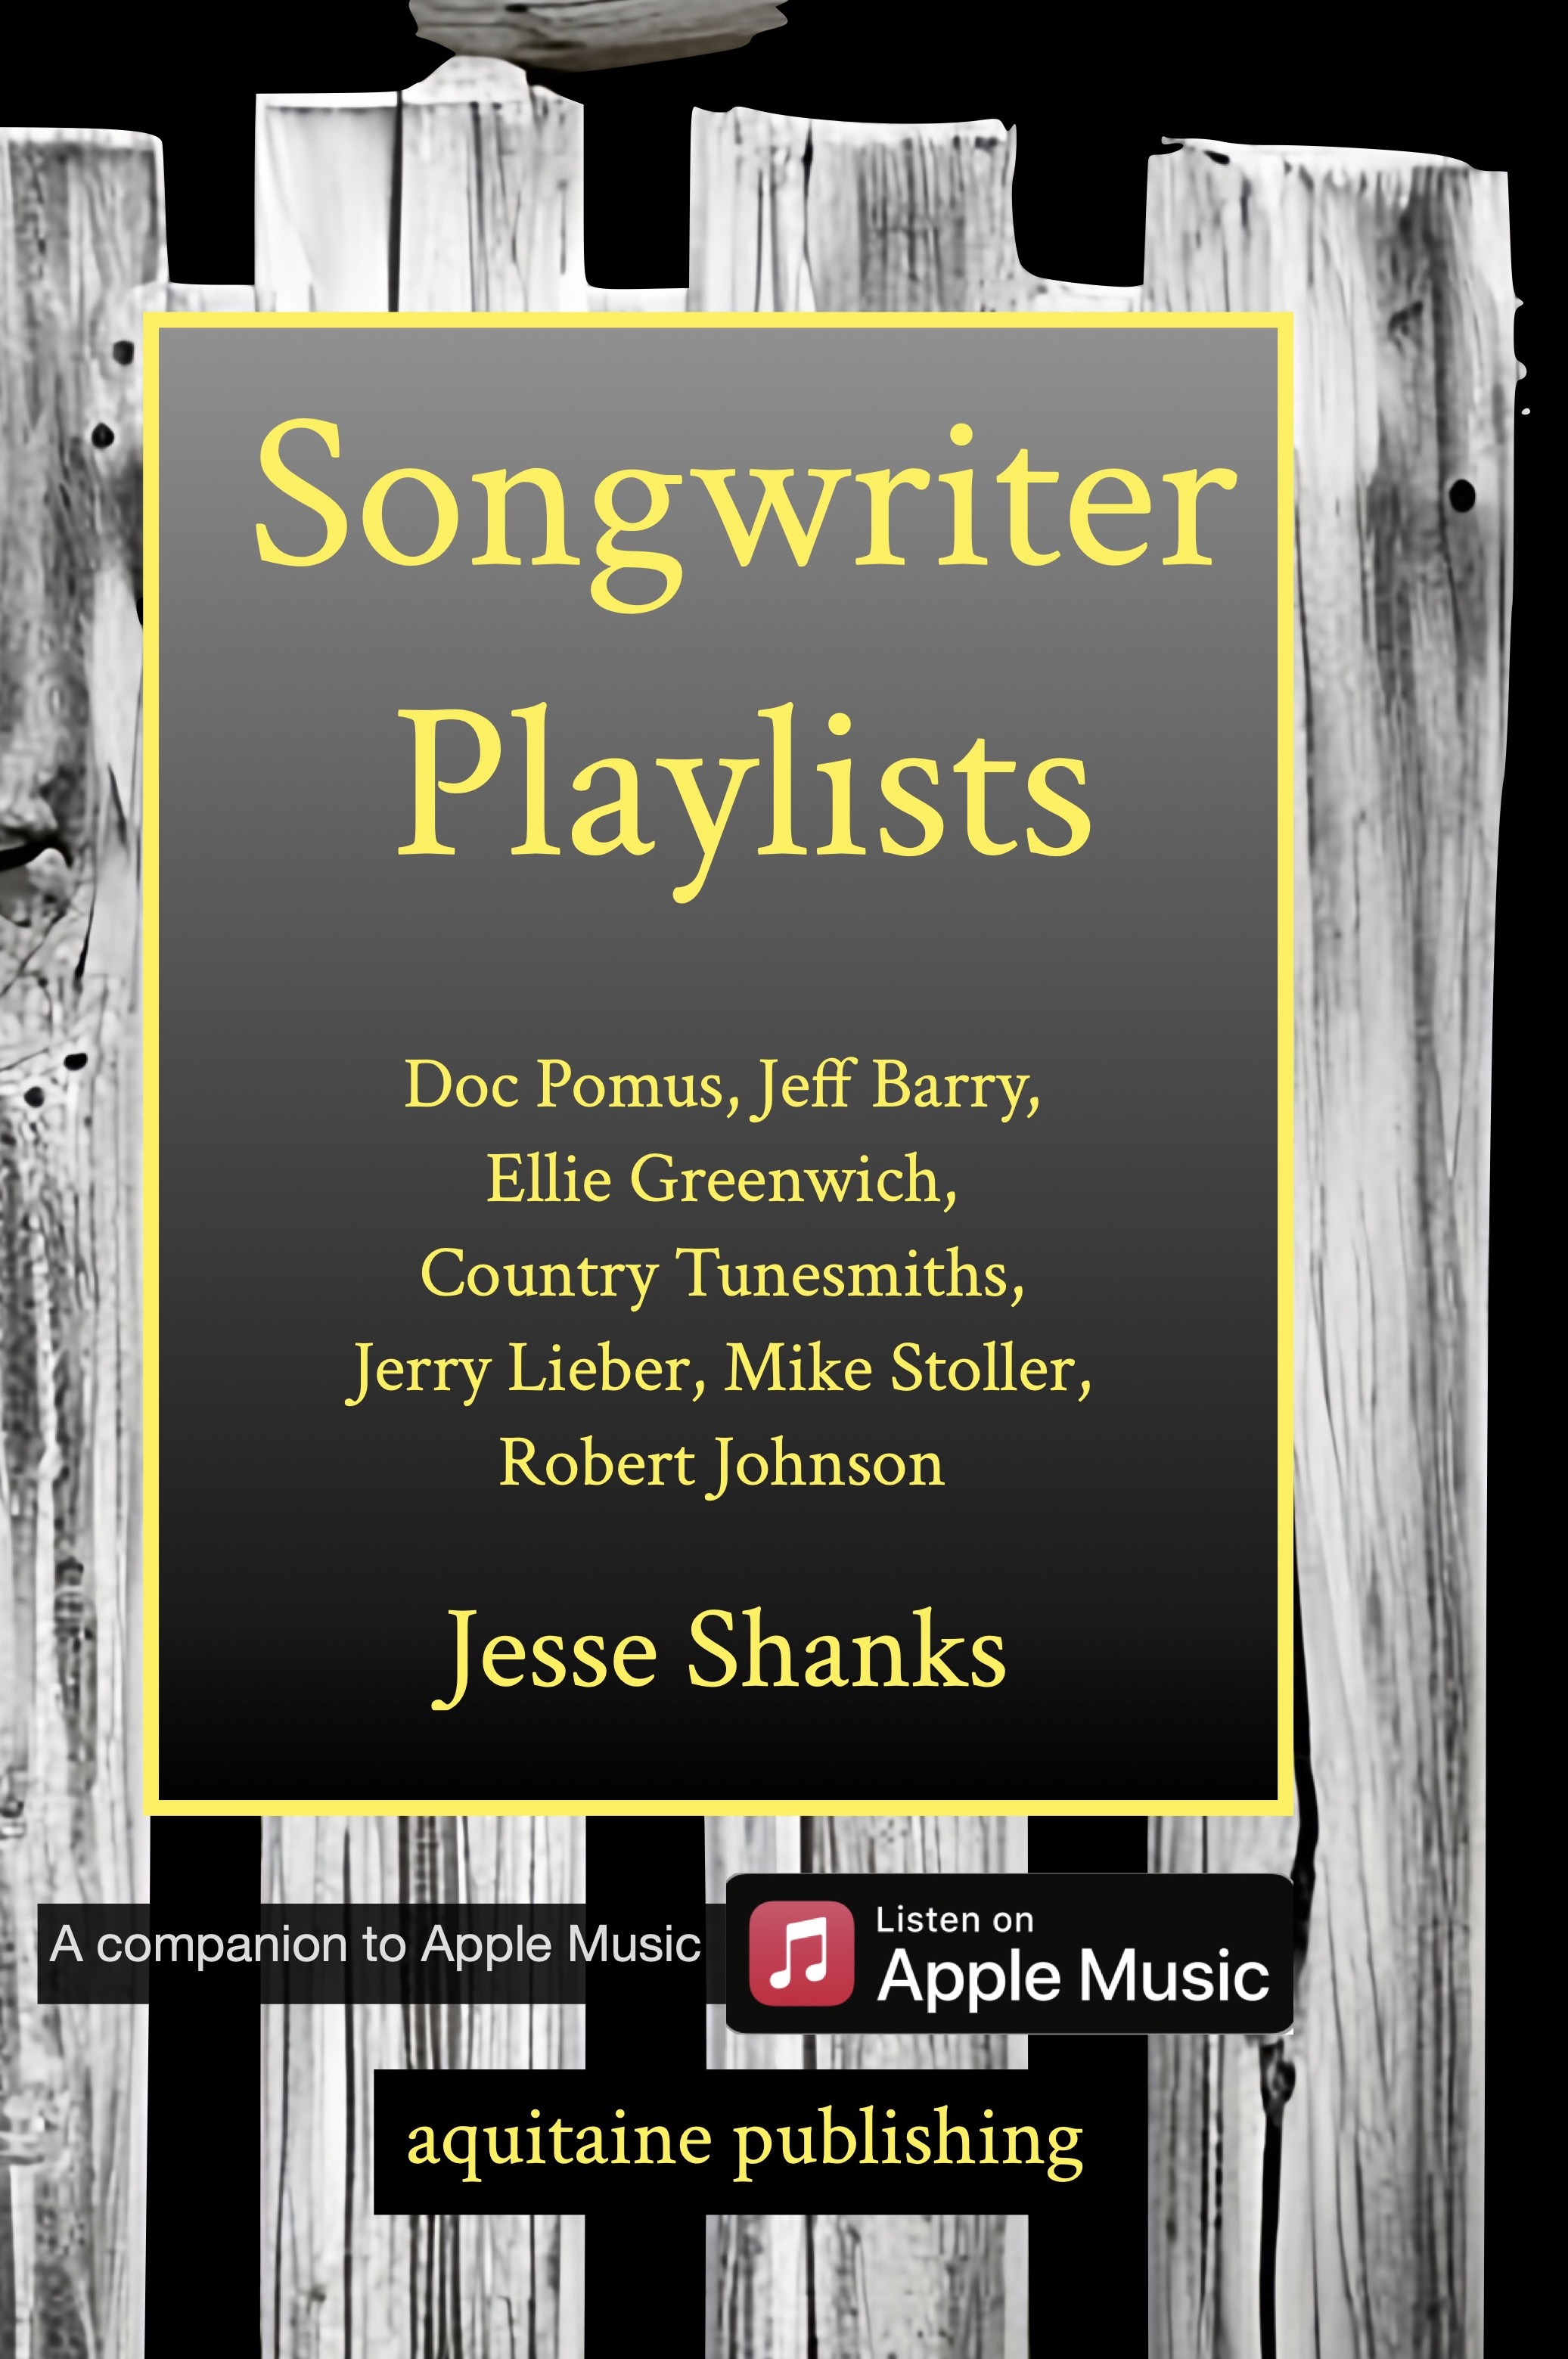 Songwriters Playlists